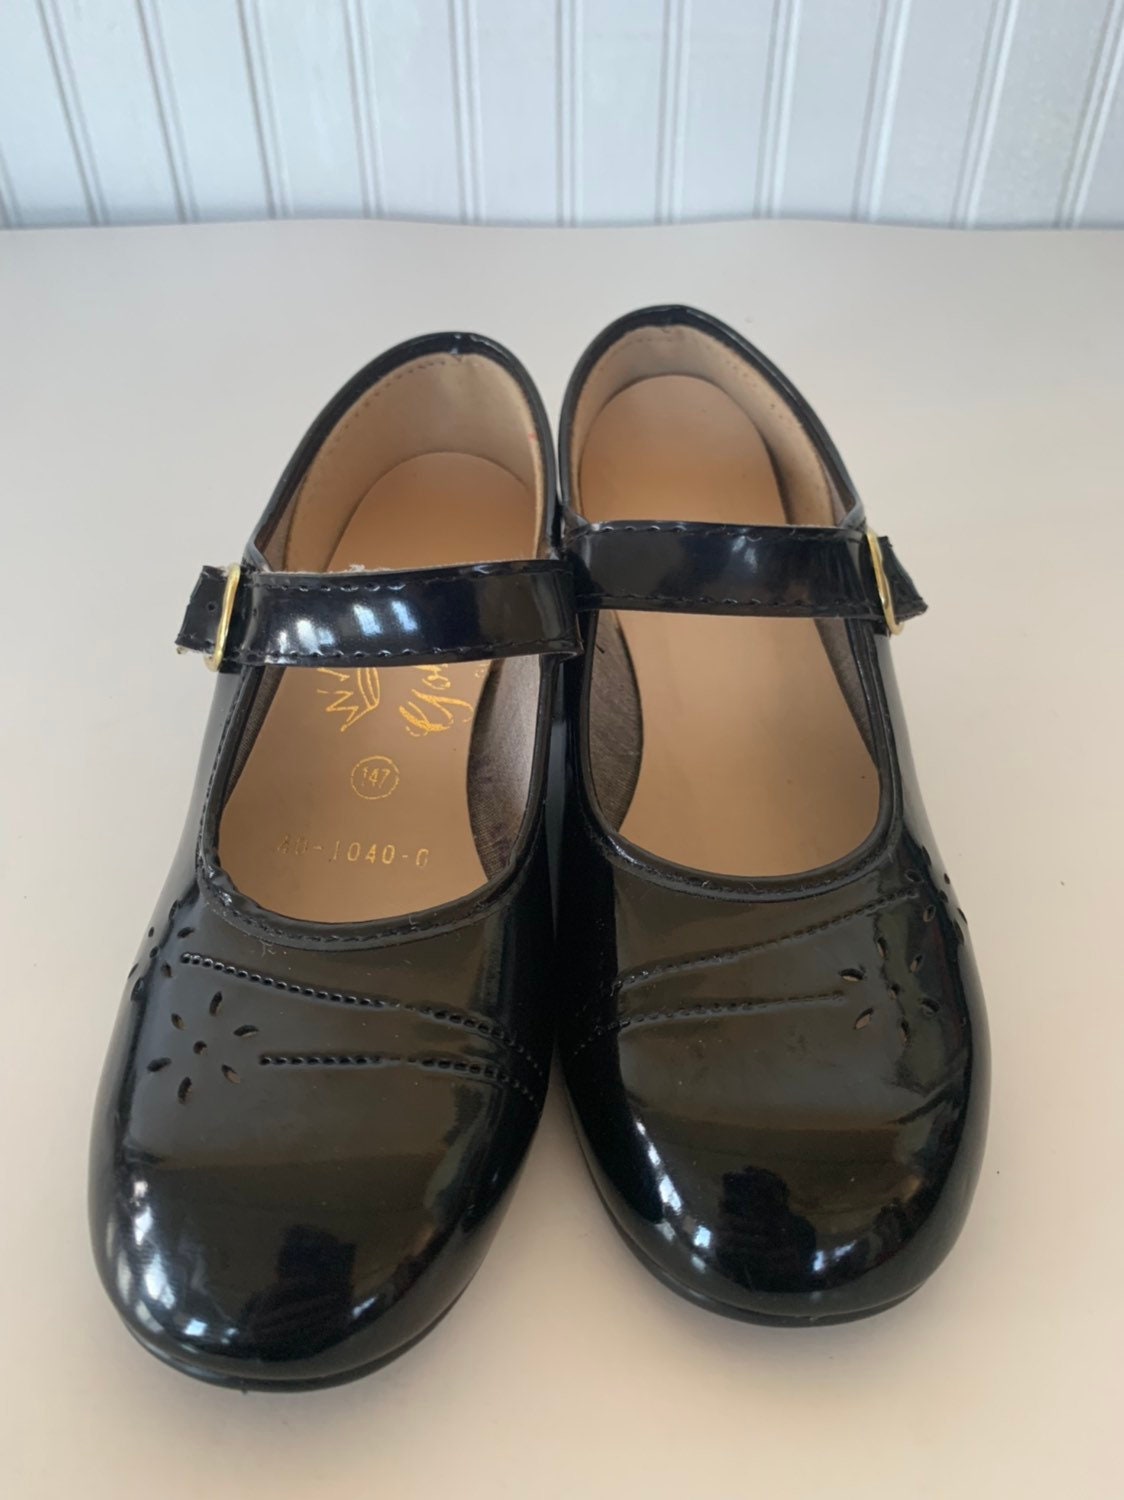 Vintage 80s Deadstock Girls Mary Janes Size 1 Patent Leather Black Heel ...